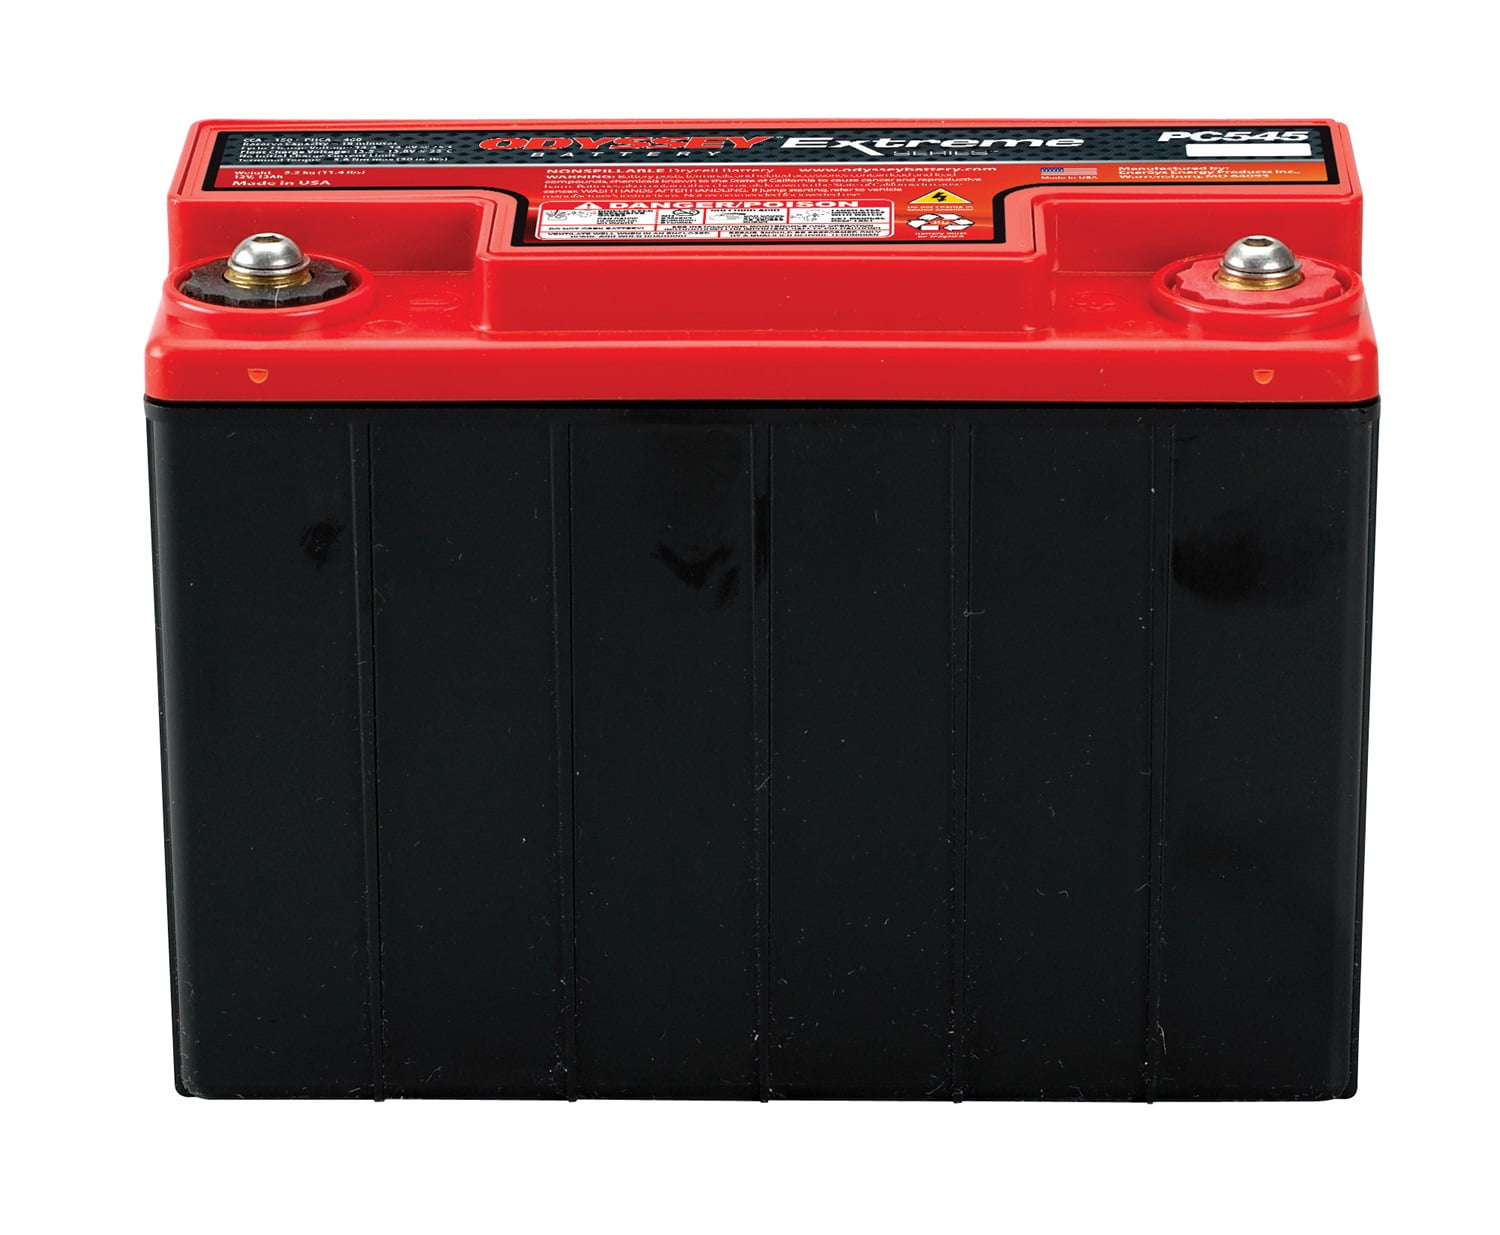 VMAX MR137 for SUNDECK power boats w/group 31 marine deep cycle 12V AGM battery